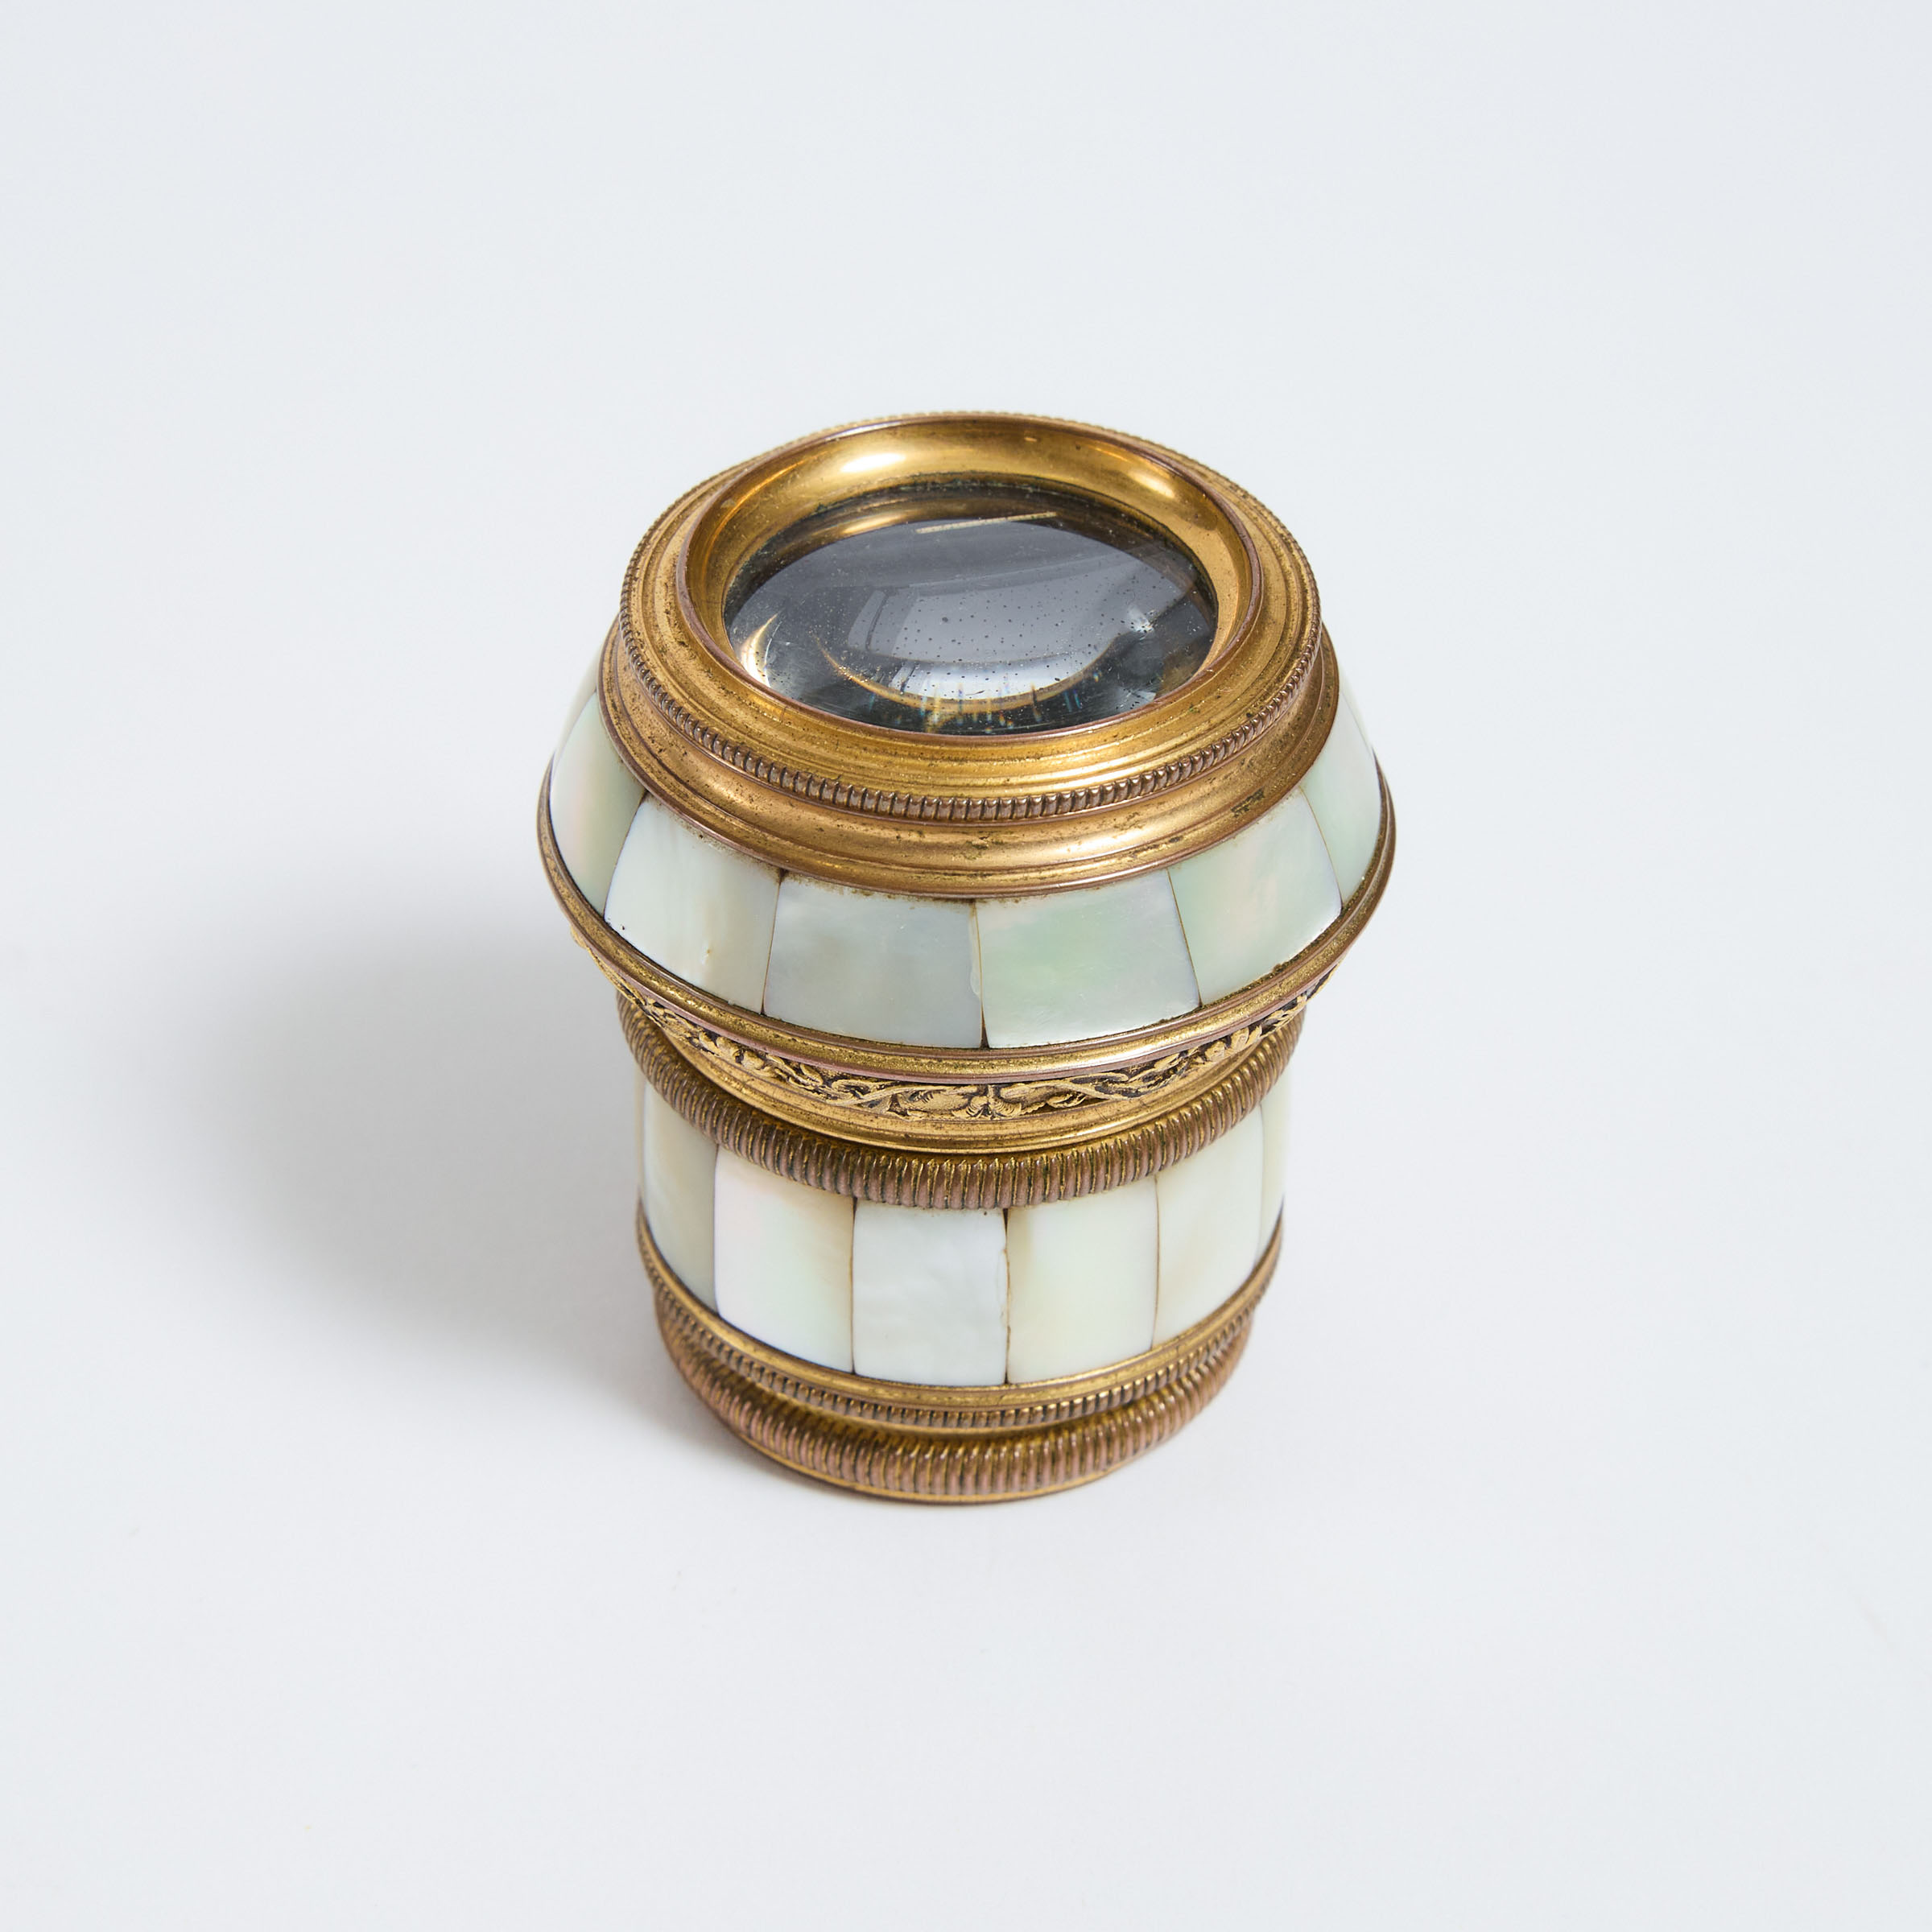 French Gilt Metal Mounted Abalone Single Draw Spy Glass, 19th century